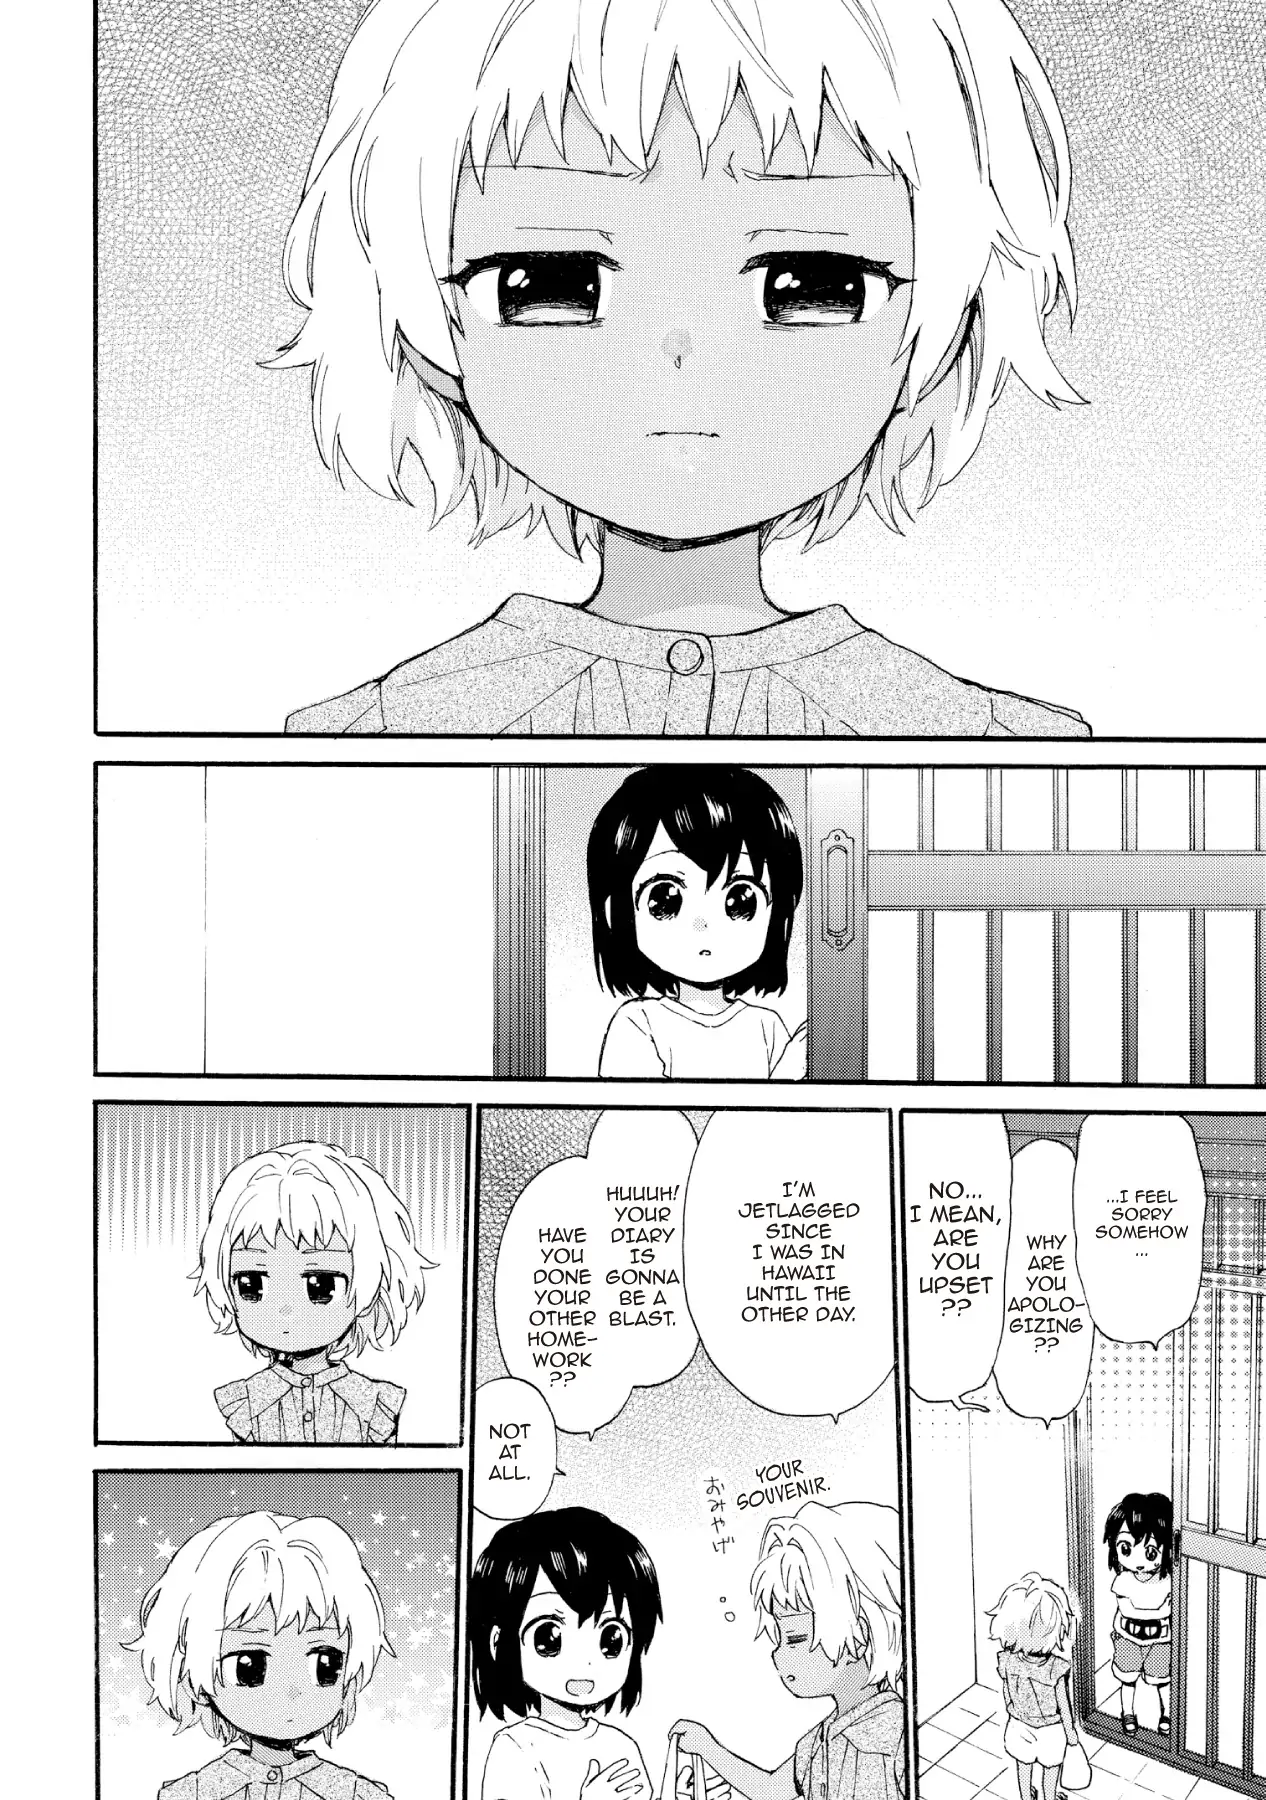 The Cute Little Granny Girl Hinata-chan - chapter 64 - #4